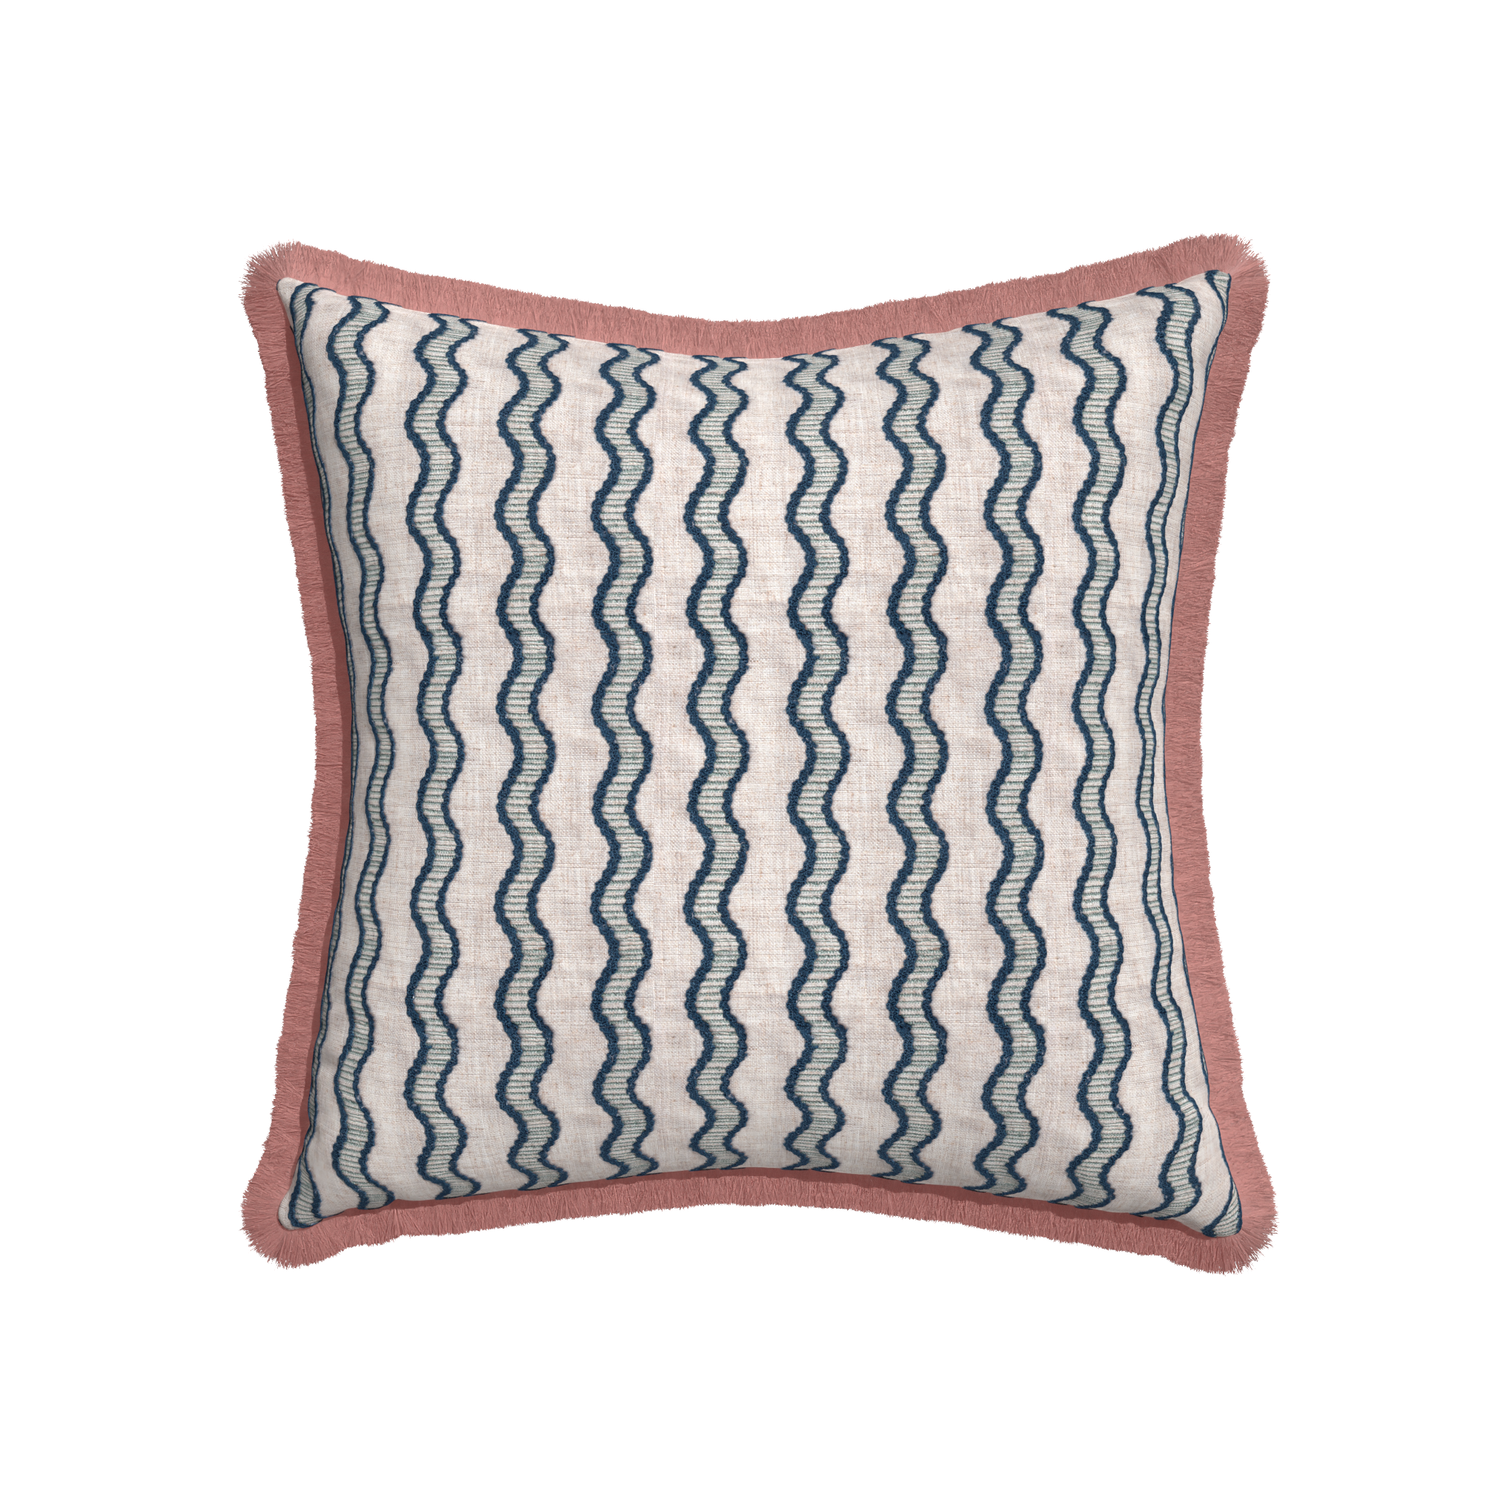 22-square beatrice custom embroidered wavepillow with d fringe on white background